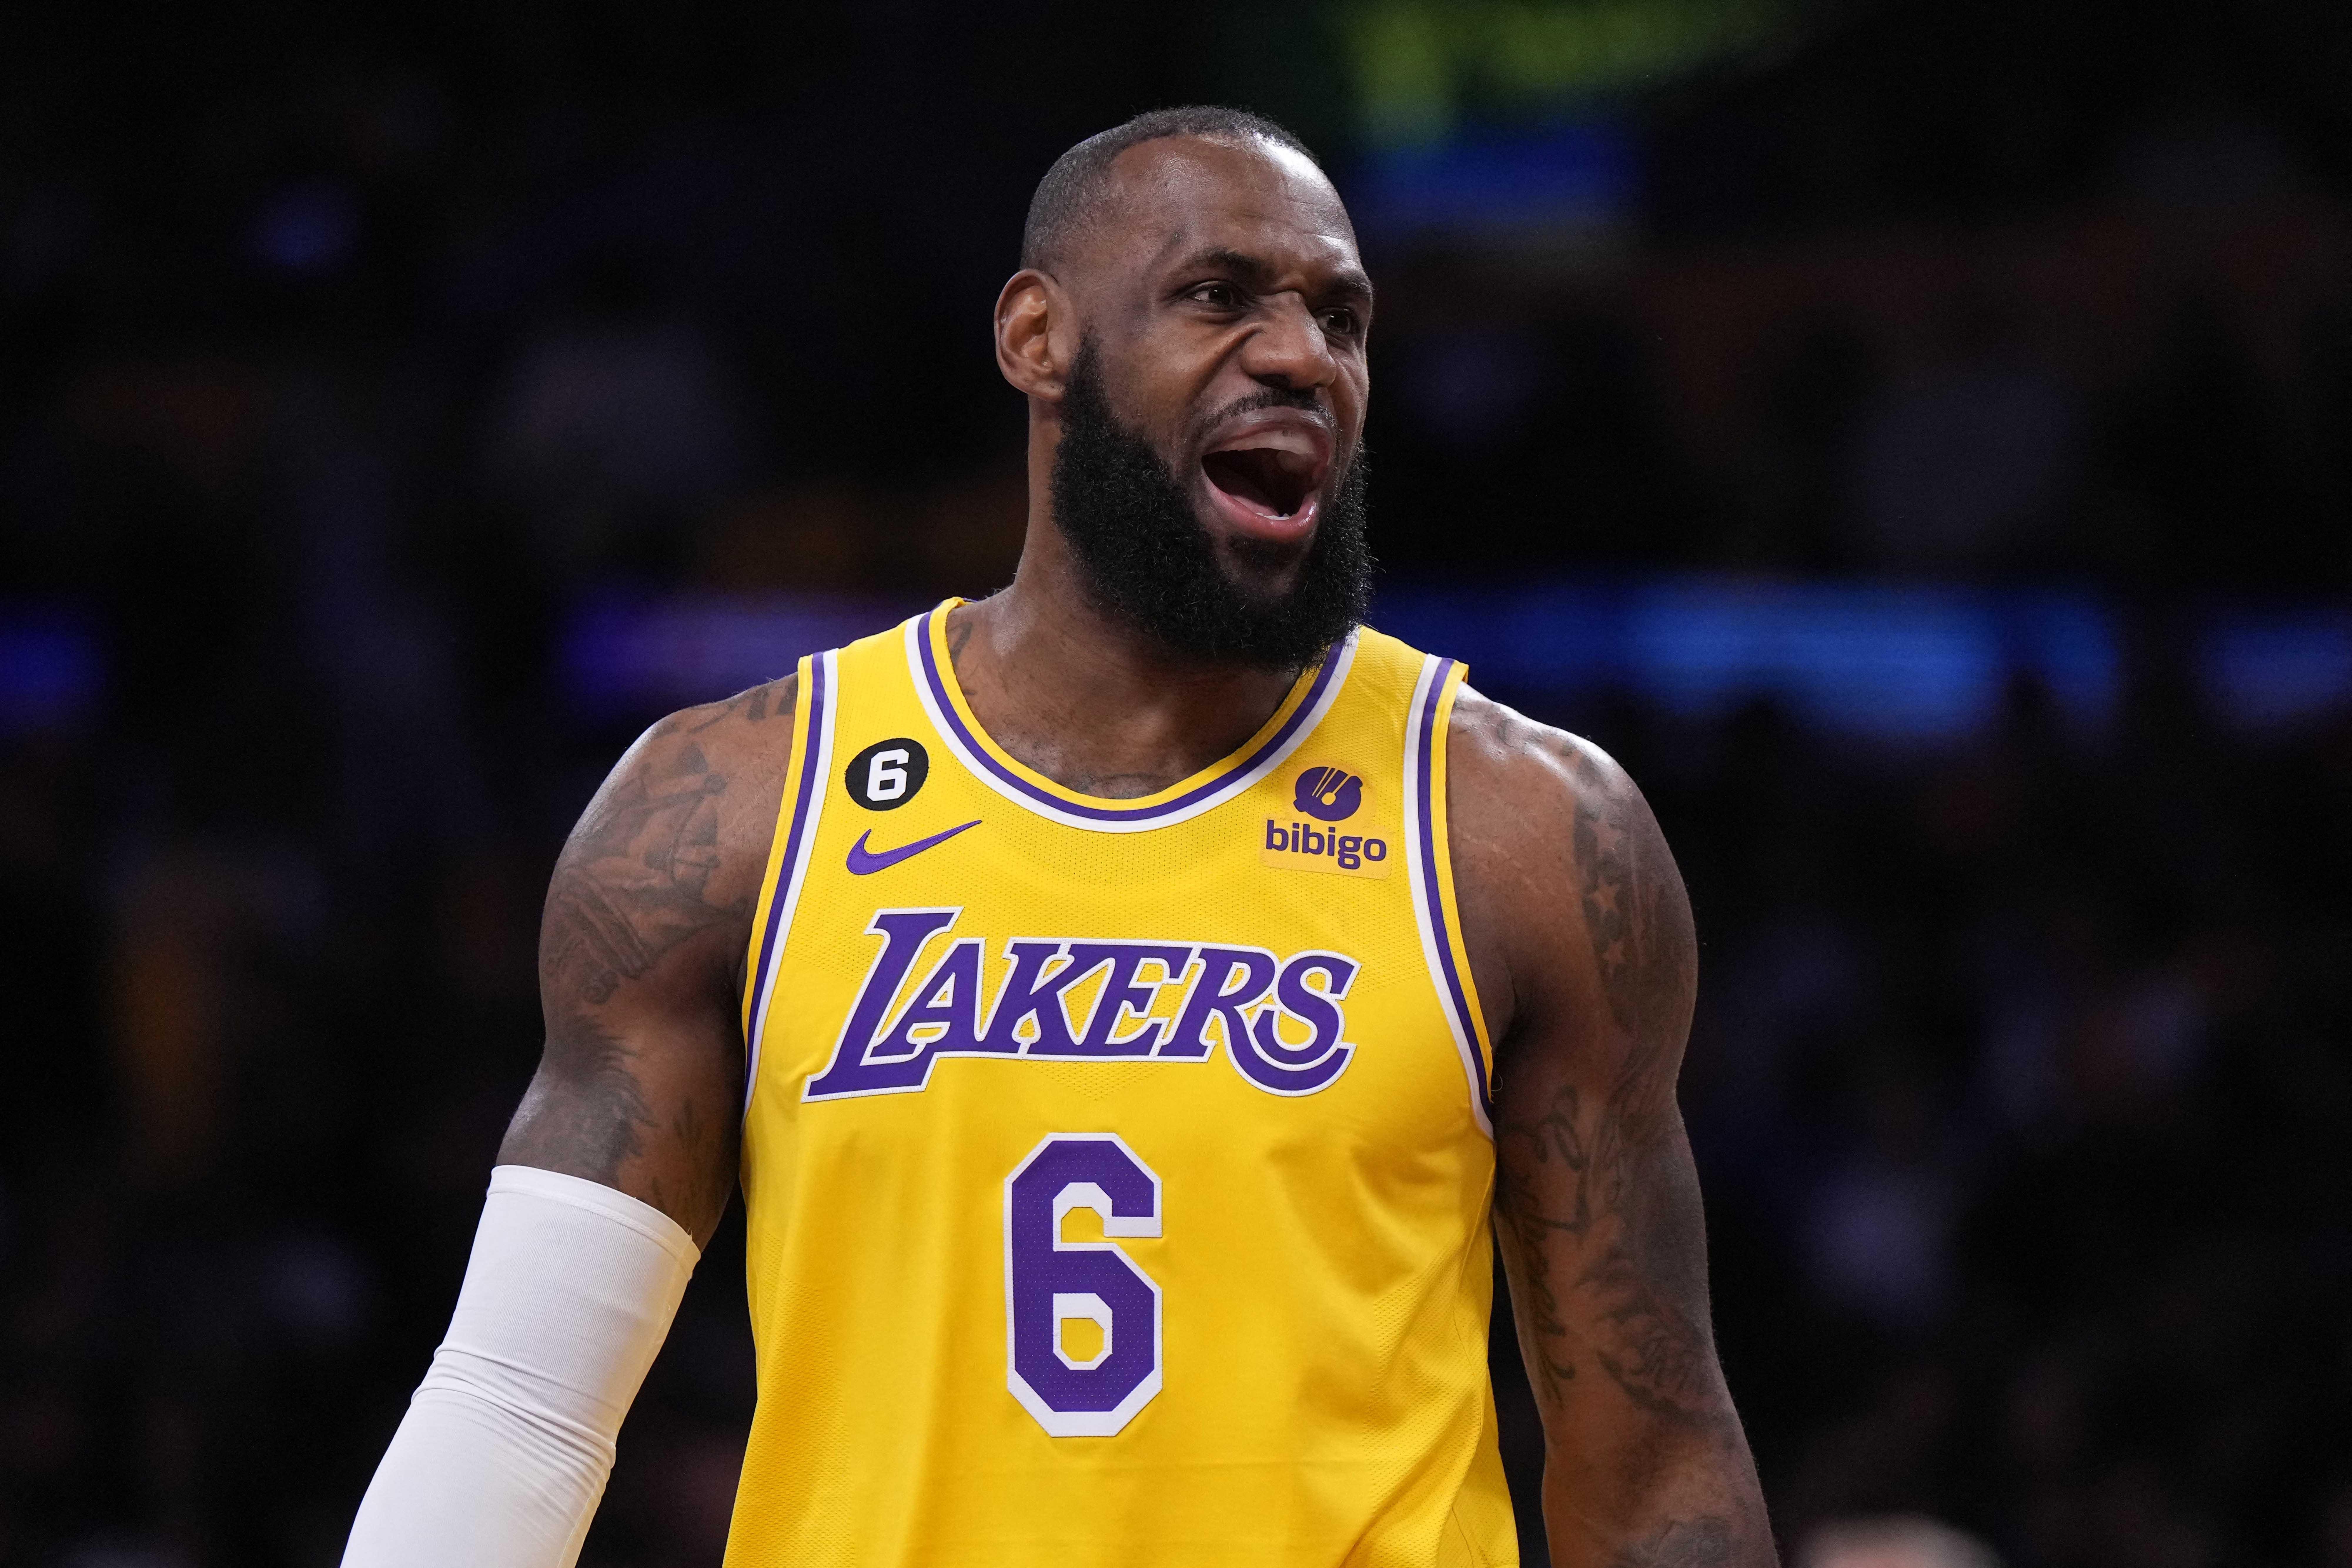 LeBron James has earned the right to decide his future, says LA